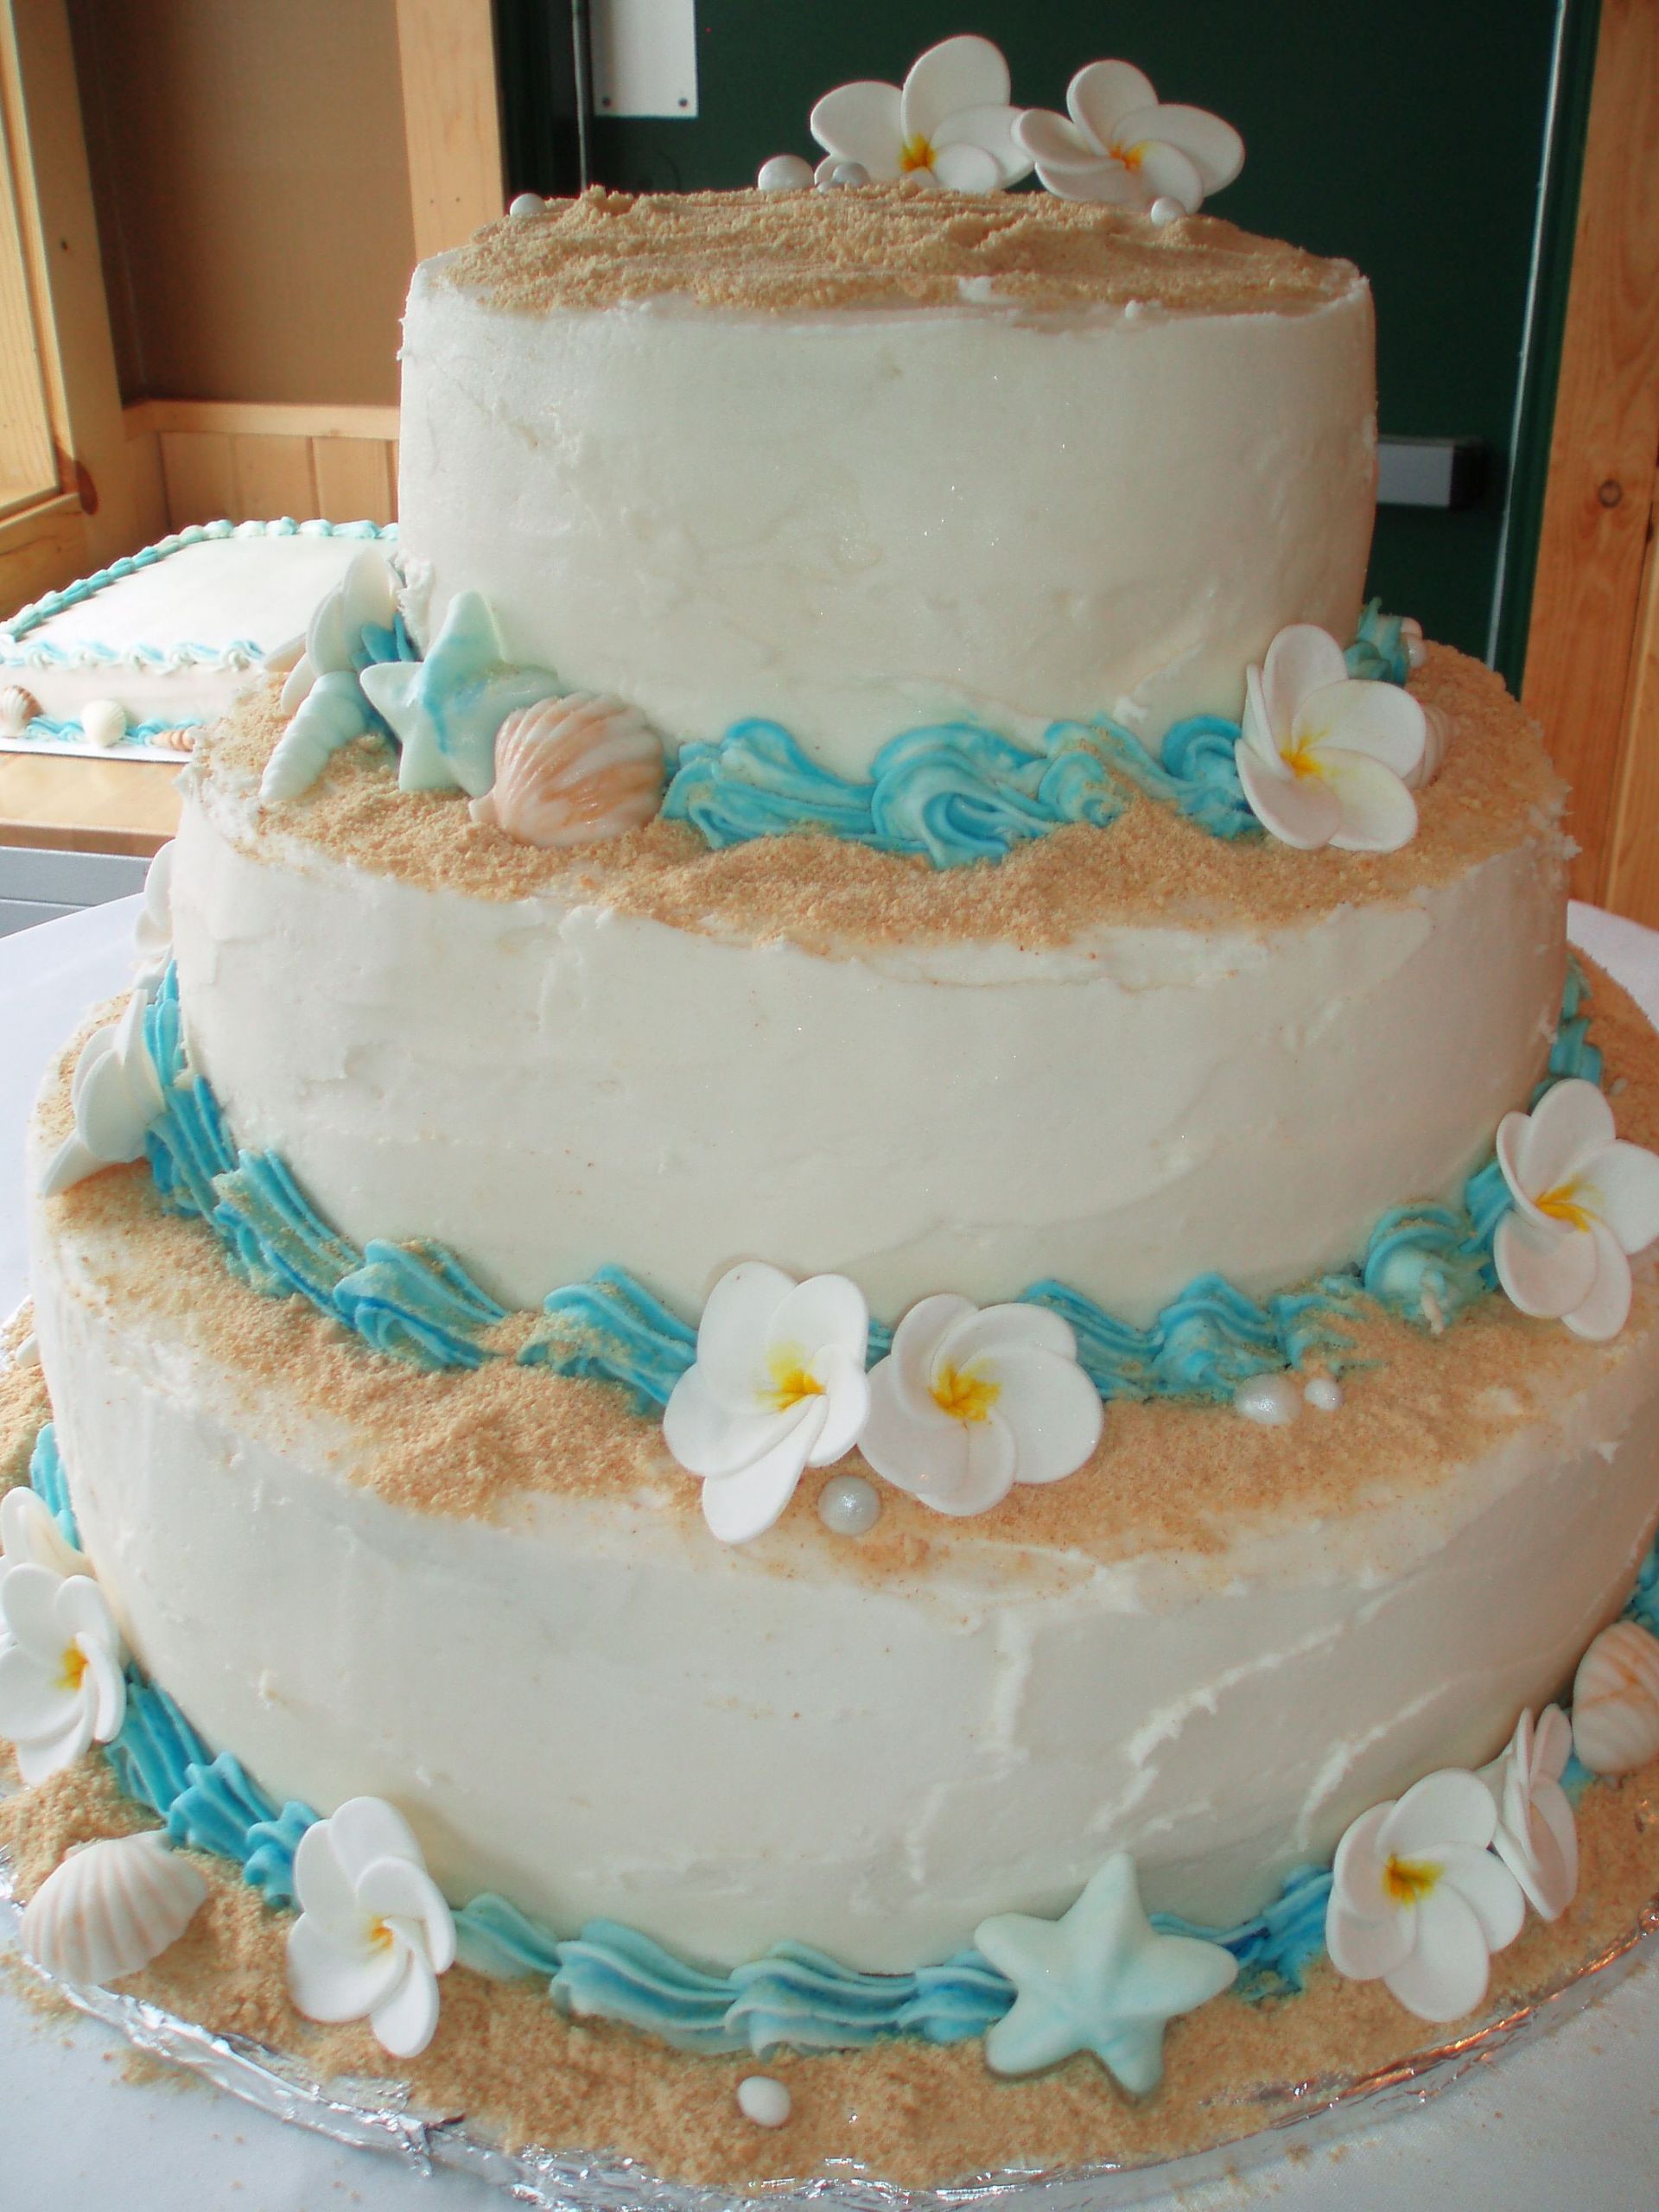 Wedding Cake Recipes For Tiered Cakes
 Beach Wedding Cake 3 tiered beach themed wedding cake